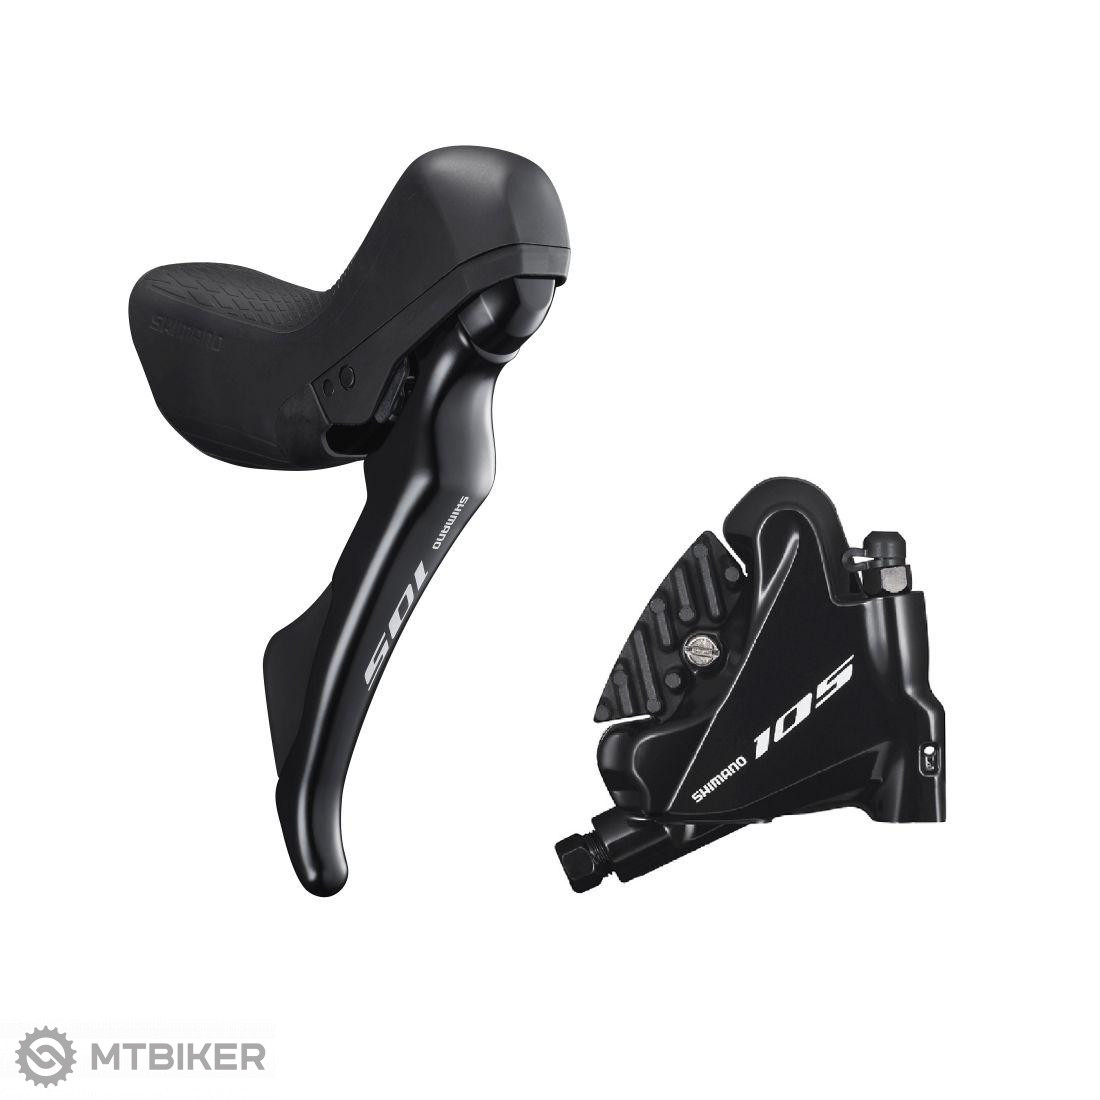 Shimano 105 ST-R7020/BR-R7070 Dual Control right shift lever/hydr. brake,  11-speed, Flat Mount, 1700 mm tube + pads